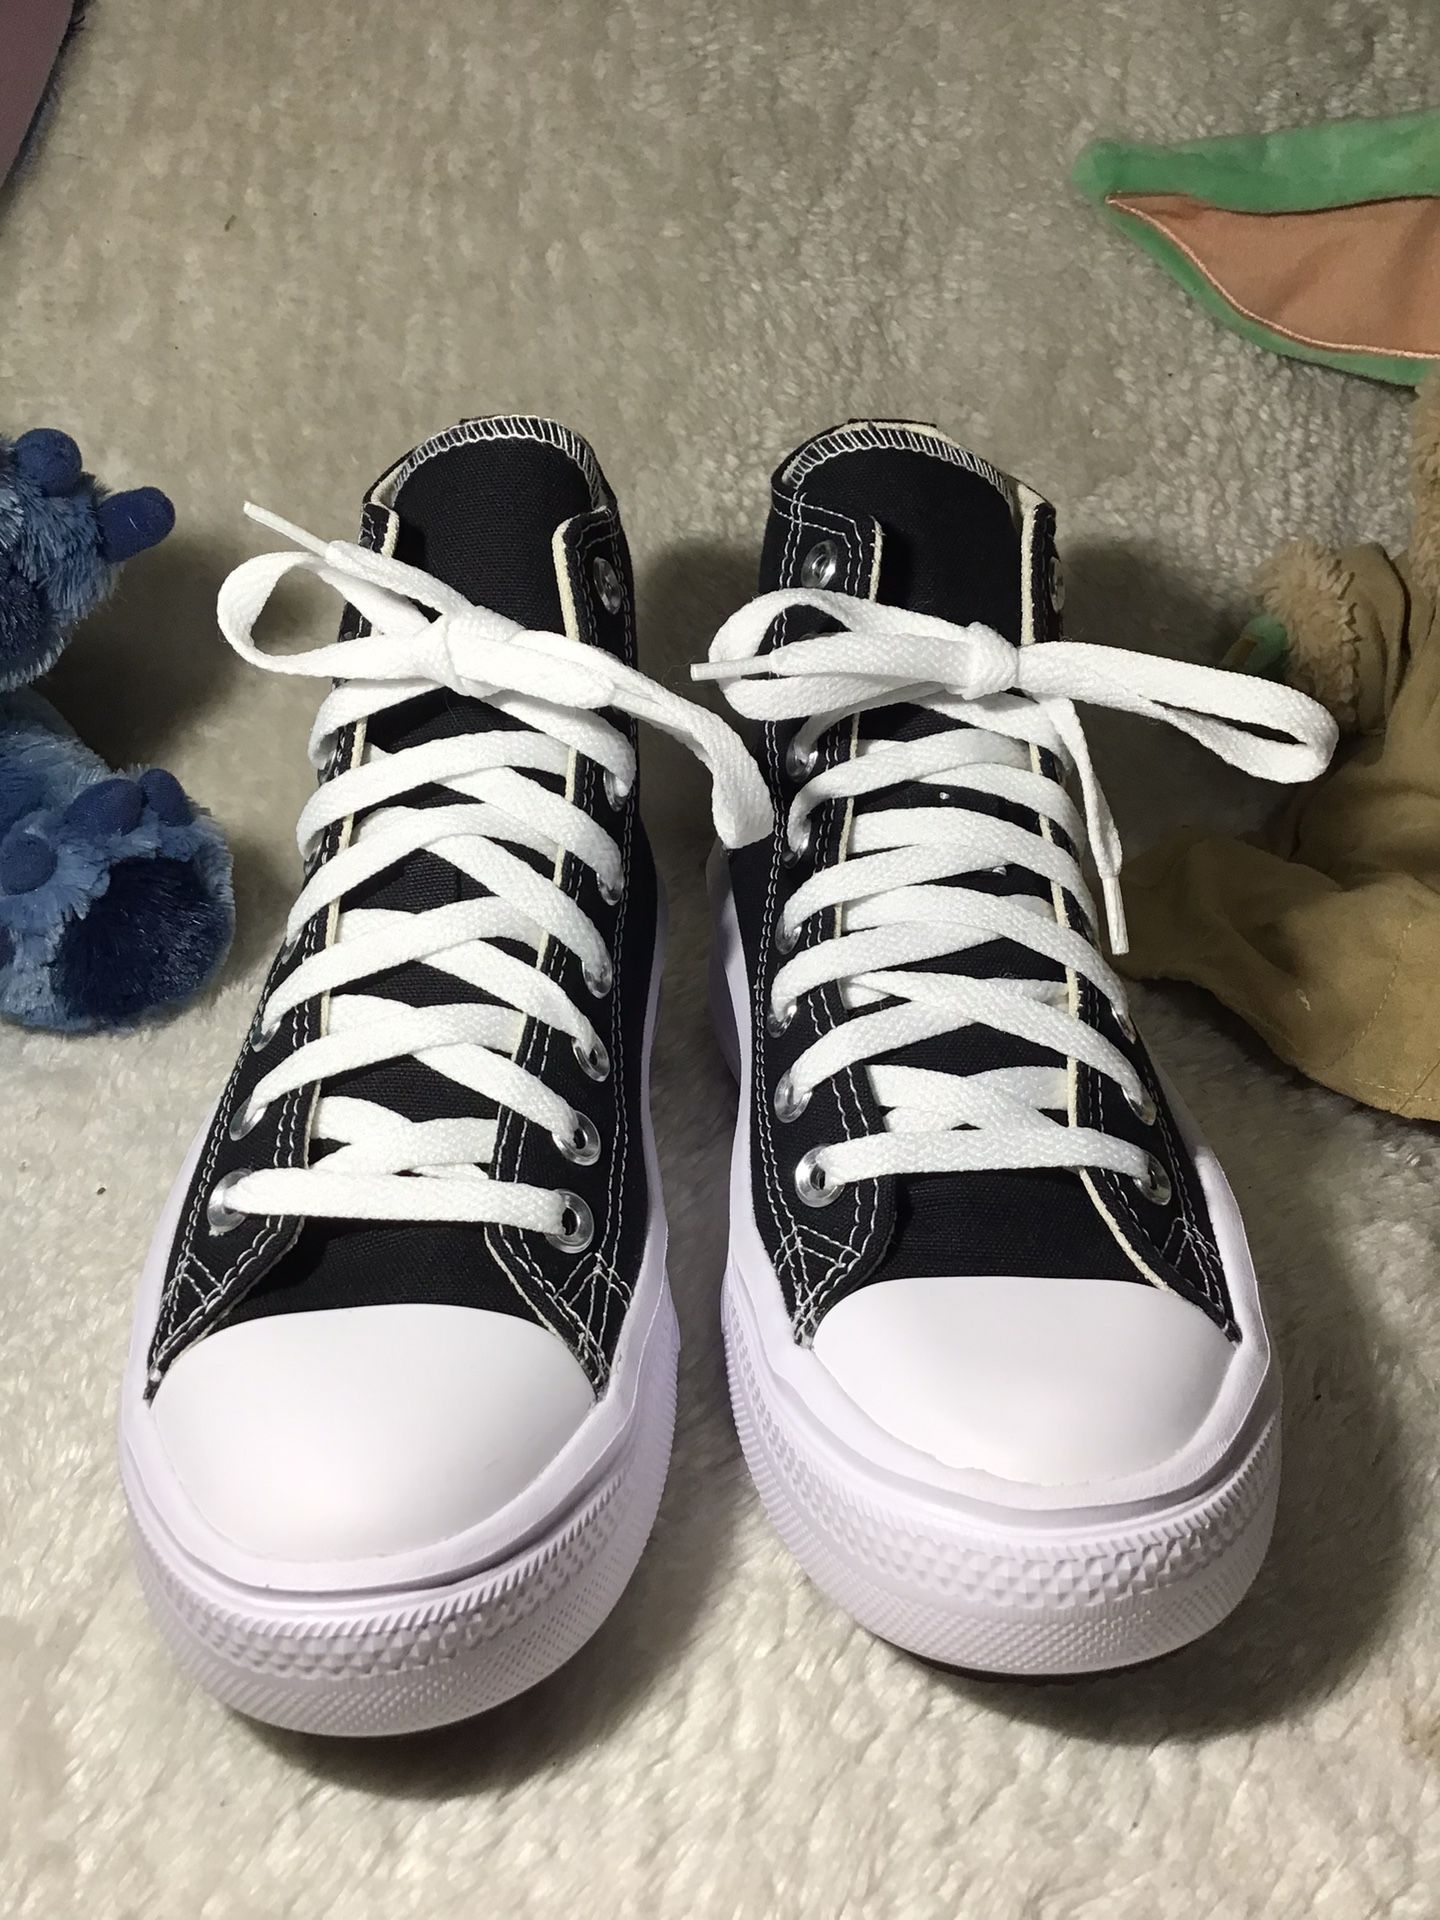 CONVERSE CHUCK ALL STAR WOMEN SIZE 7 Black Natural Ivory White {568497}